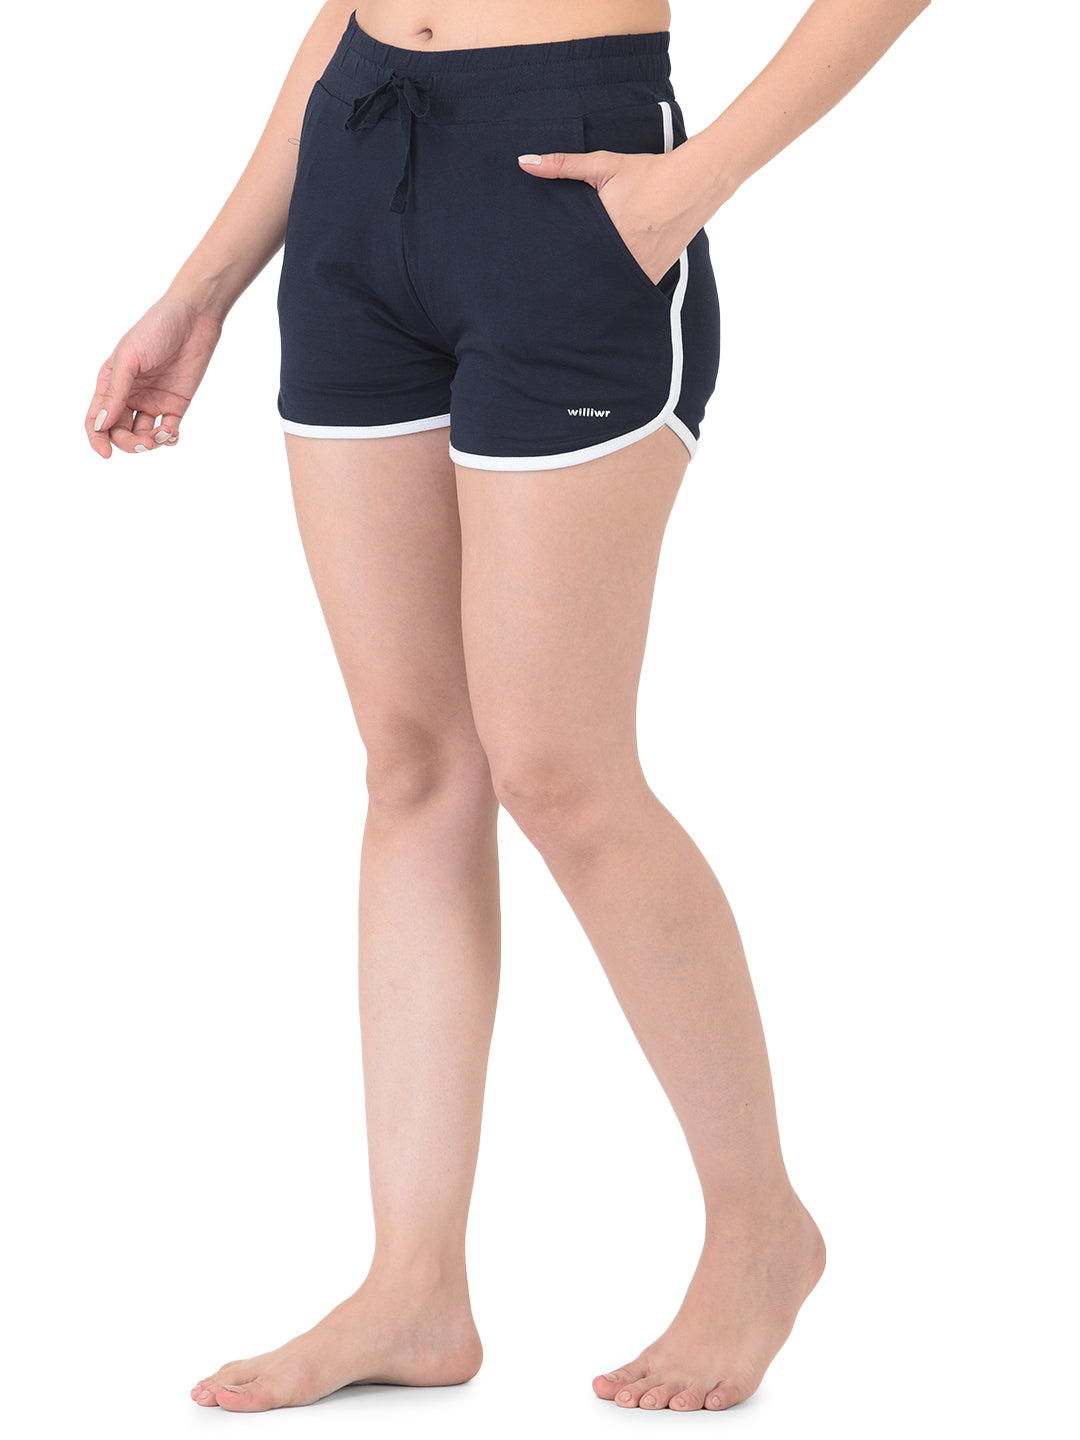 Williwr Women's Navy Color Knit Shorts